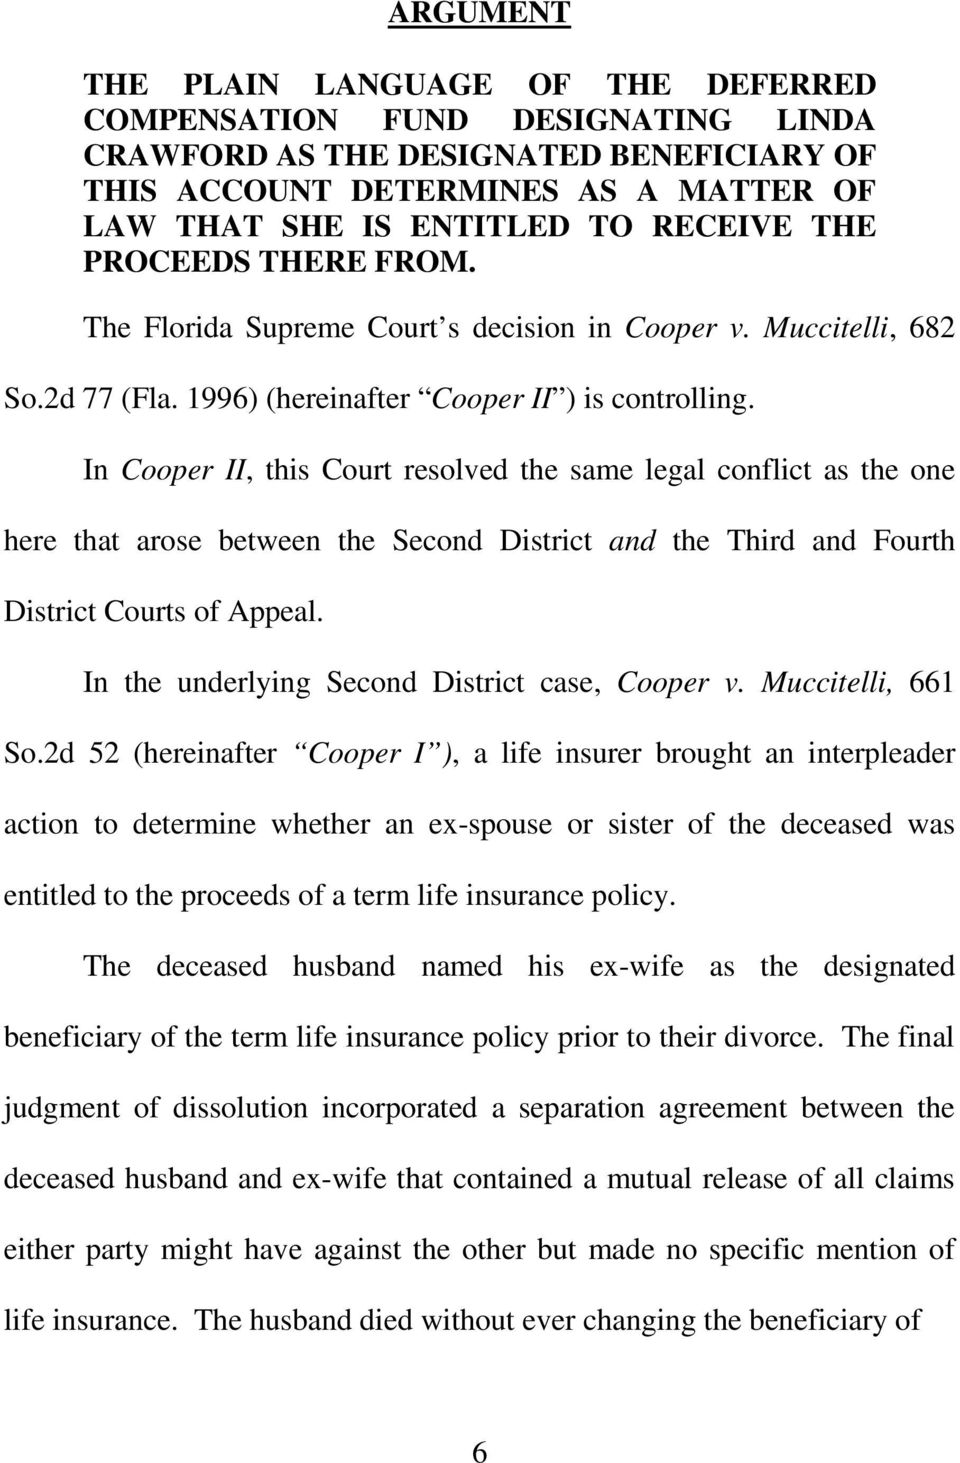 In Cooper II, this Court resolved the same legal conflict as the one here that arose between the Second District and the Third and Fourth District Courts of Appeal.